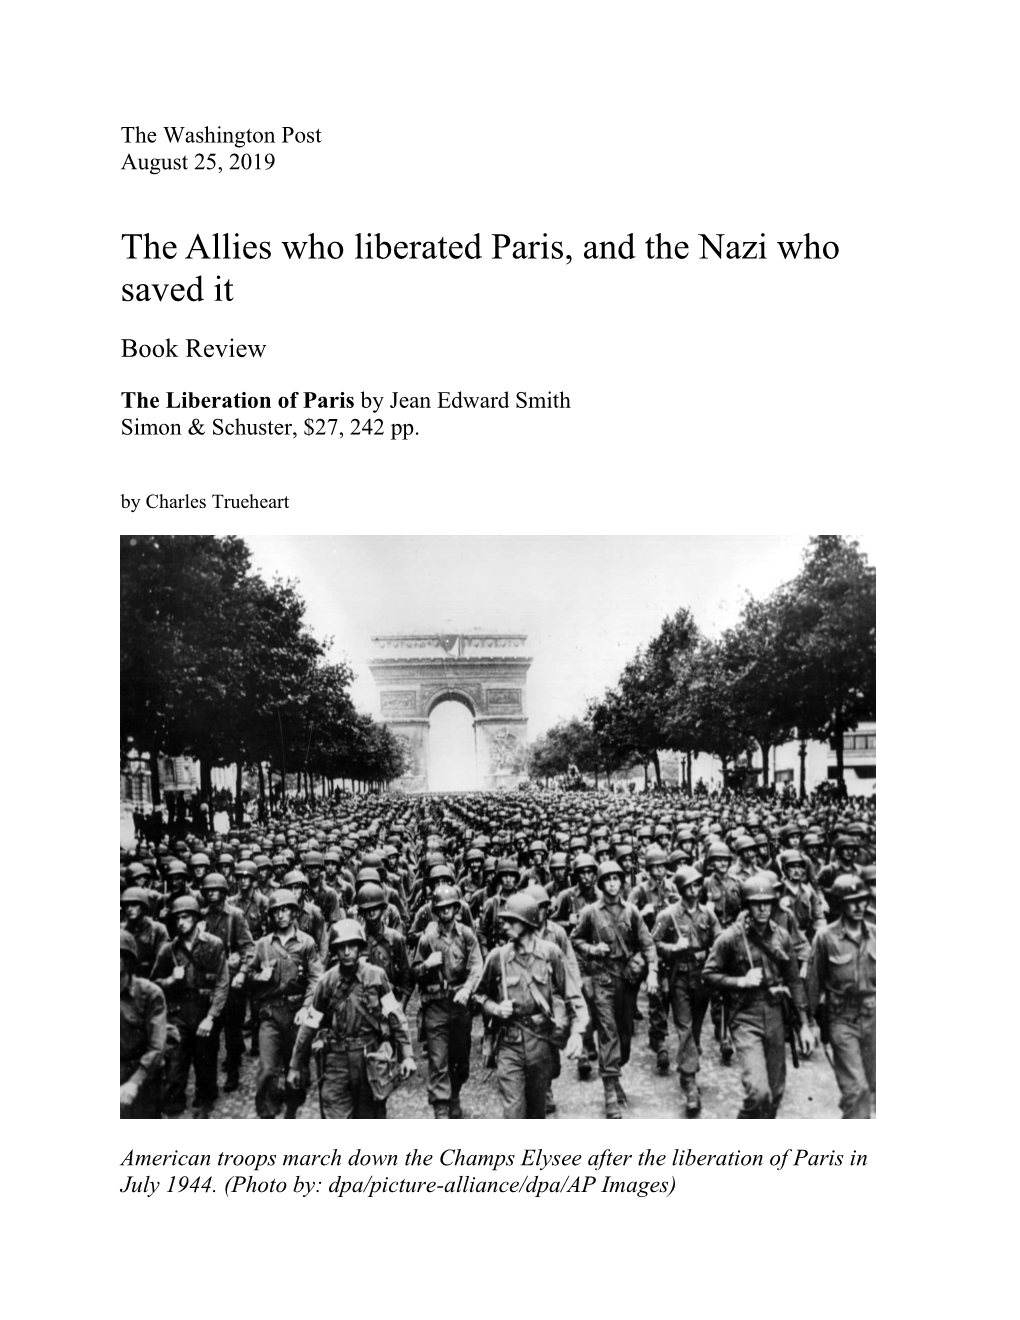 The Allies Who Liberated Paris, and the Nazi Who Saved It